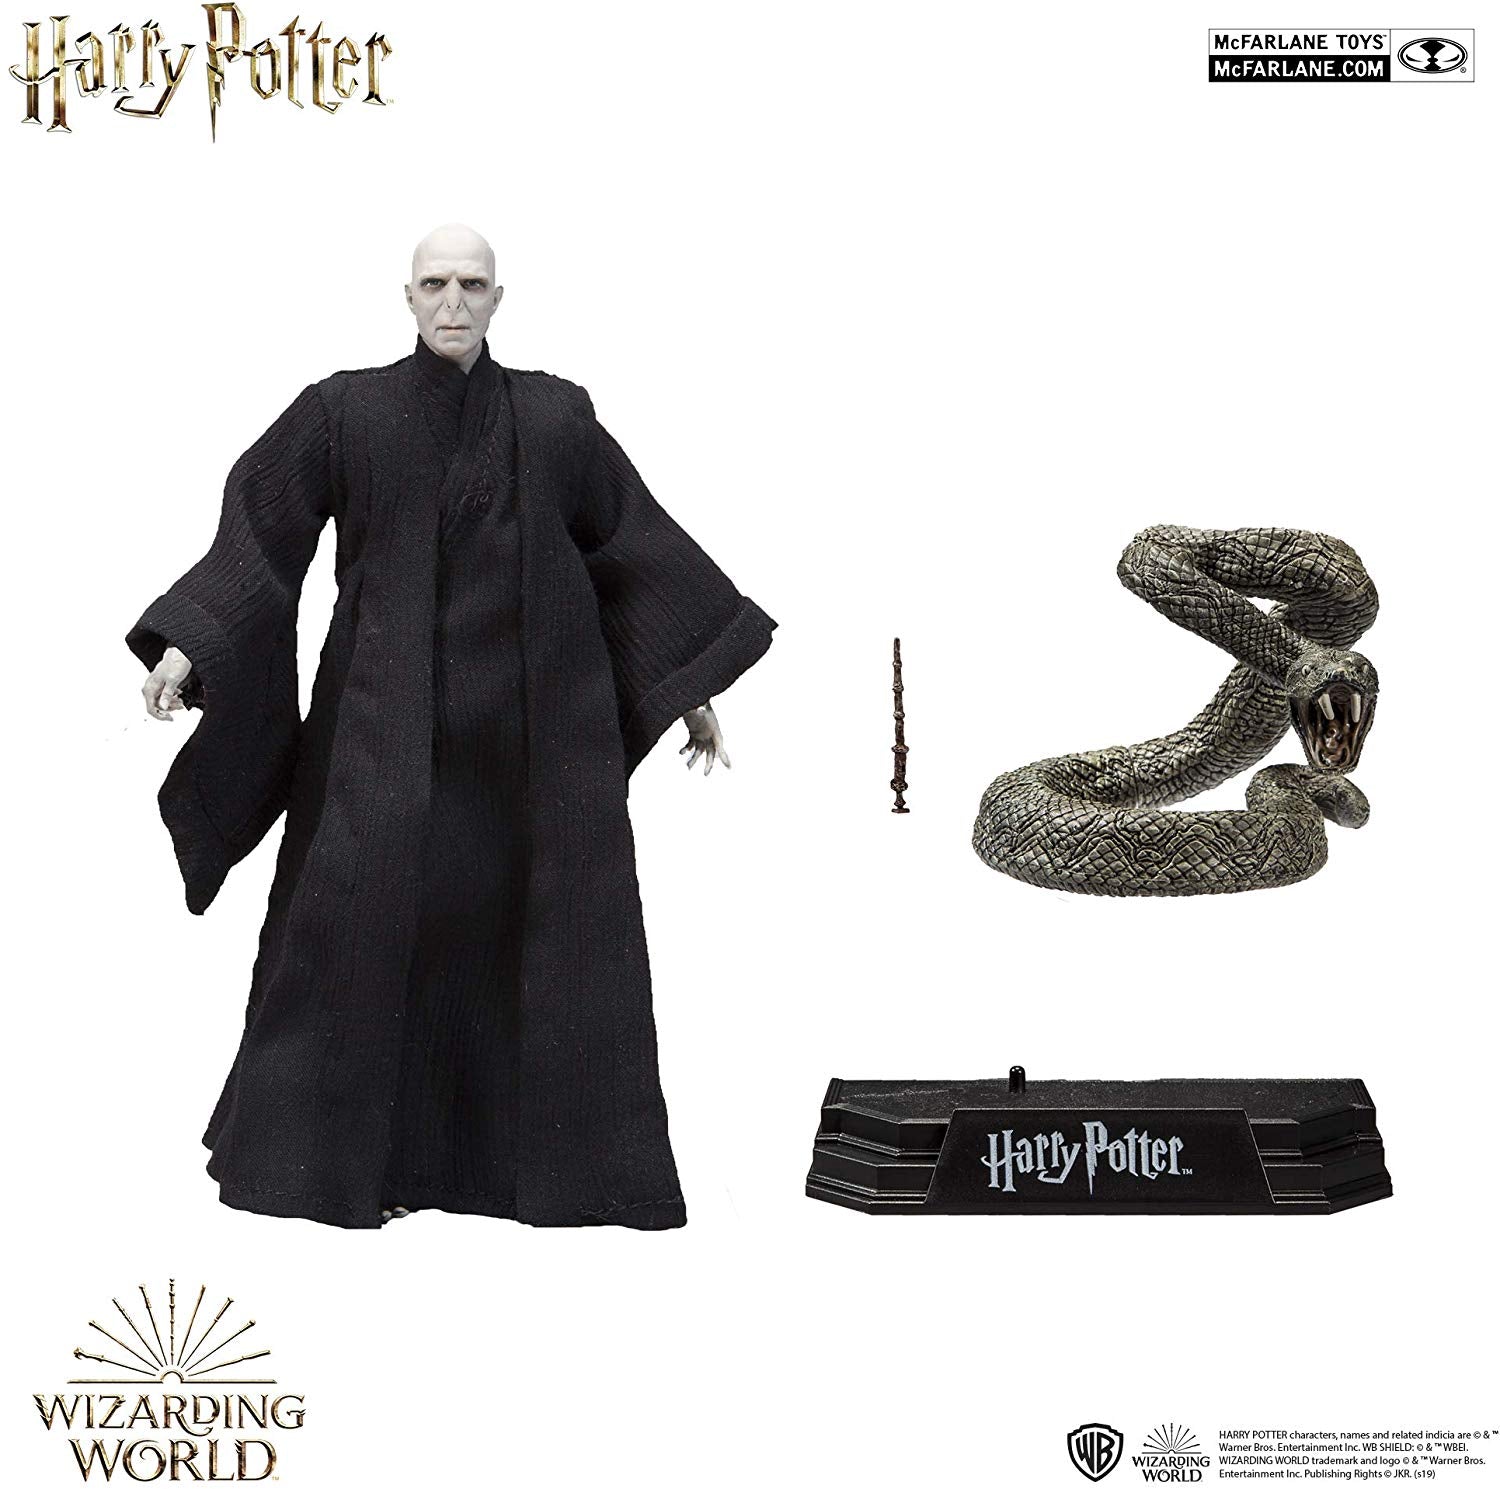 Harry Potter Lord Voldemort with Nagini - McFarlane Toys-2